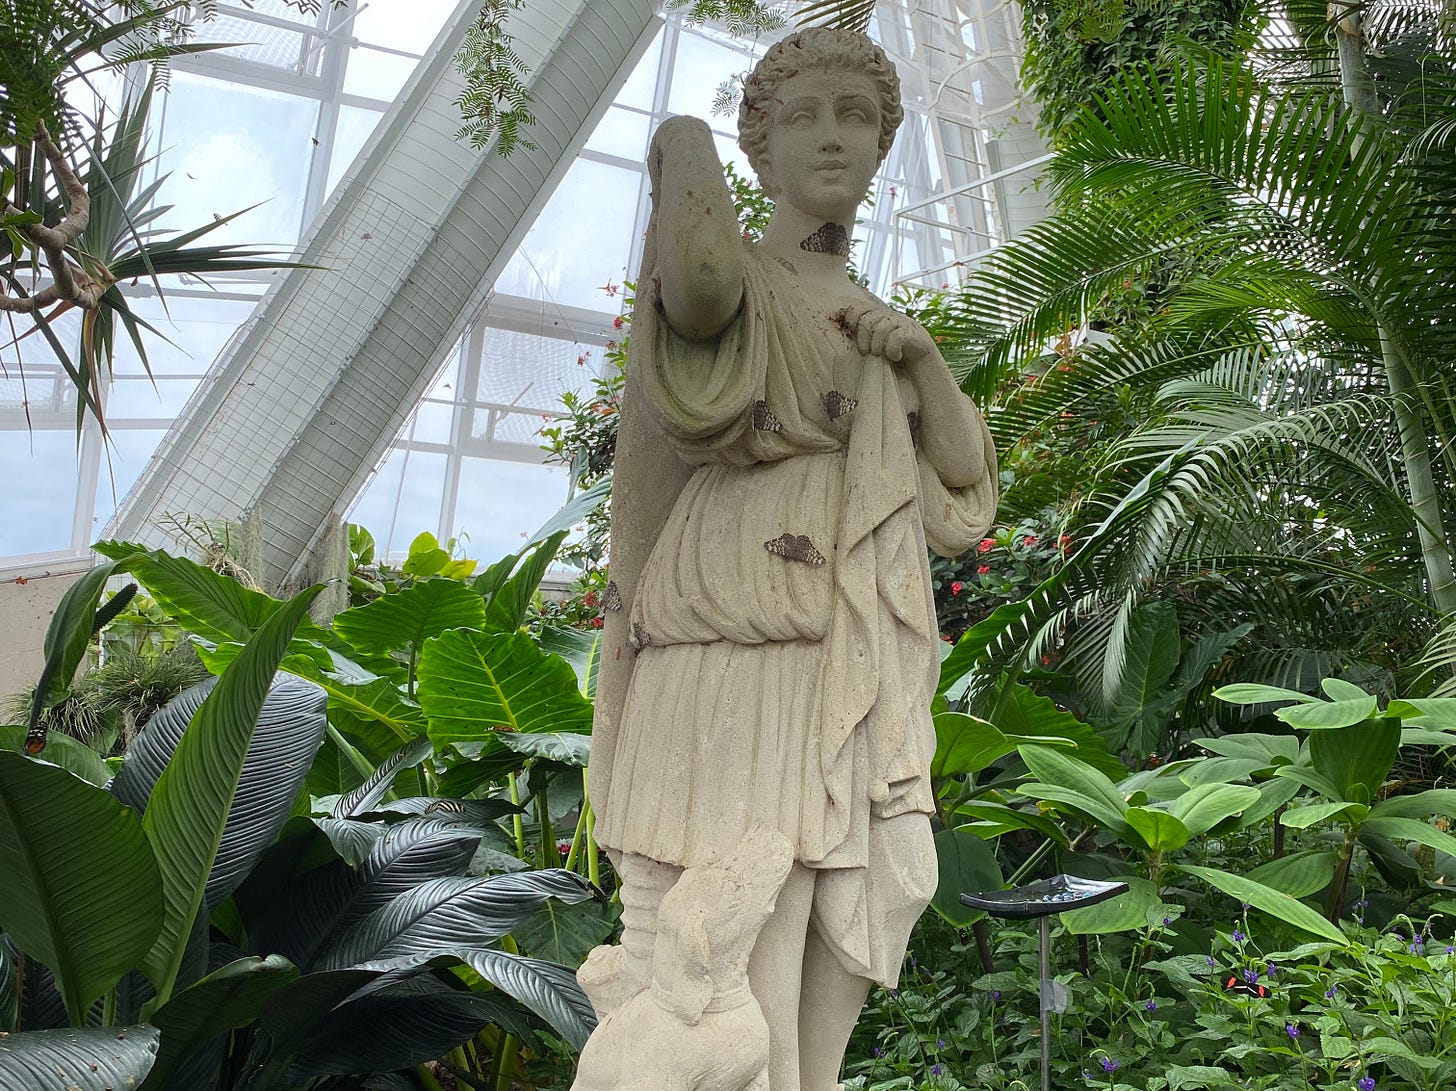 A statue of Artemis in the Niagara Parks Butterfly Conservatory covered in butterflies